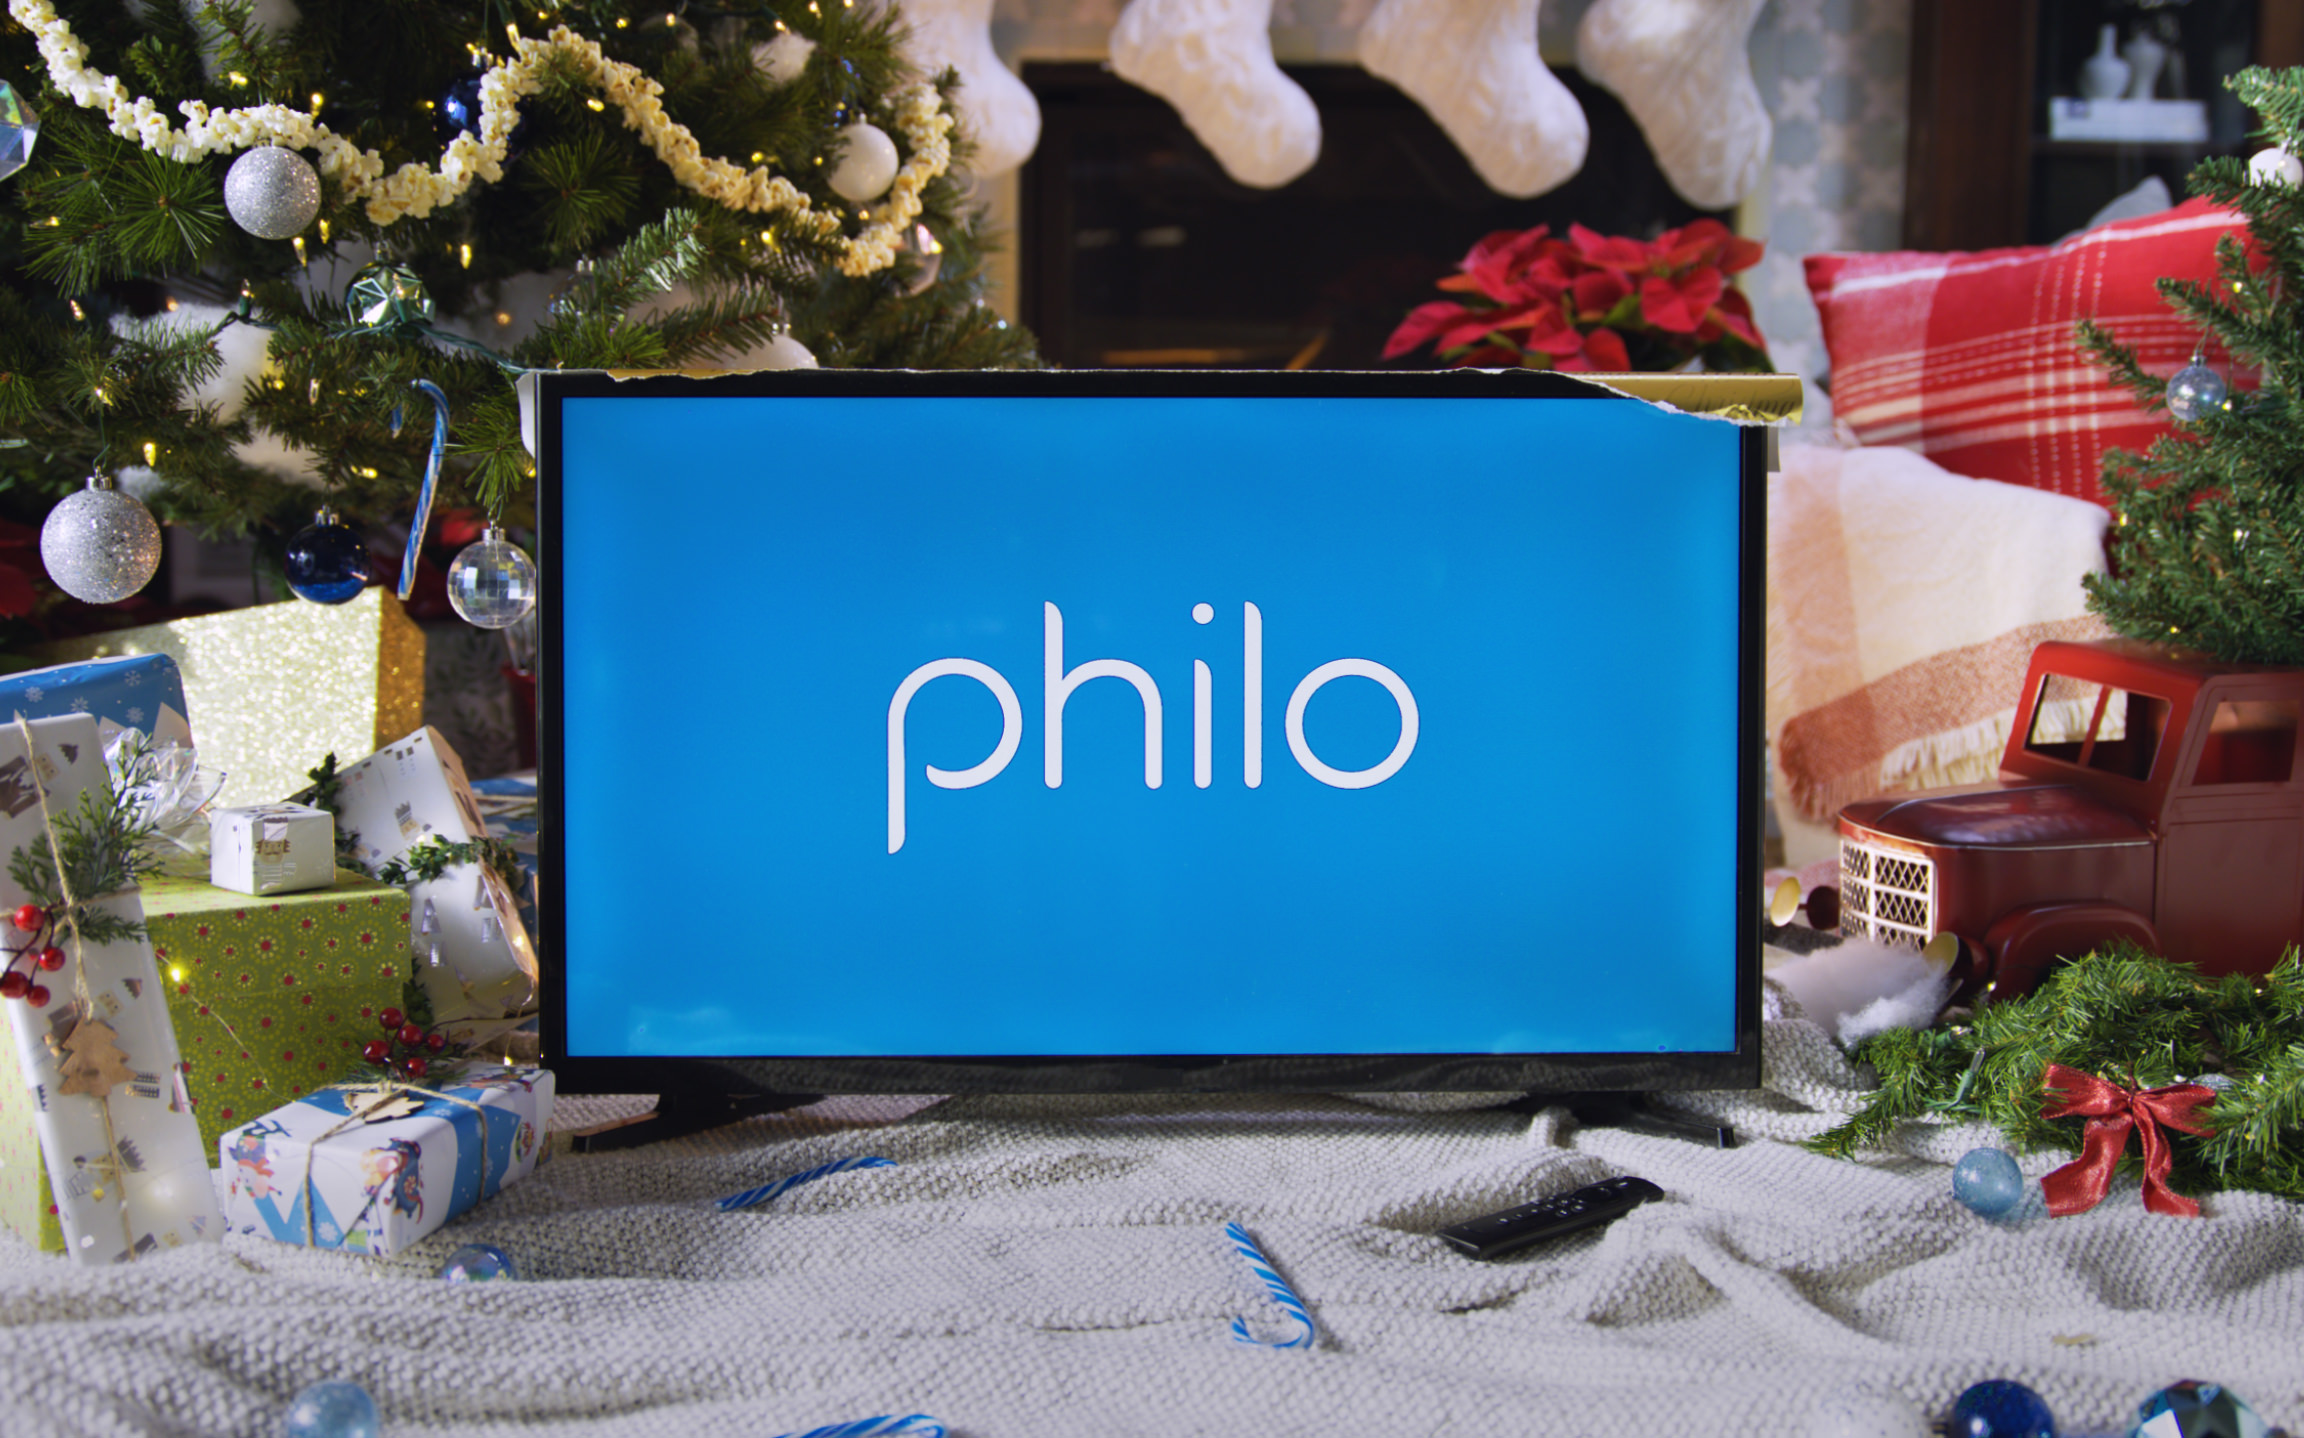 A TV in front of a Christmas setting shows Philo on a TV.